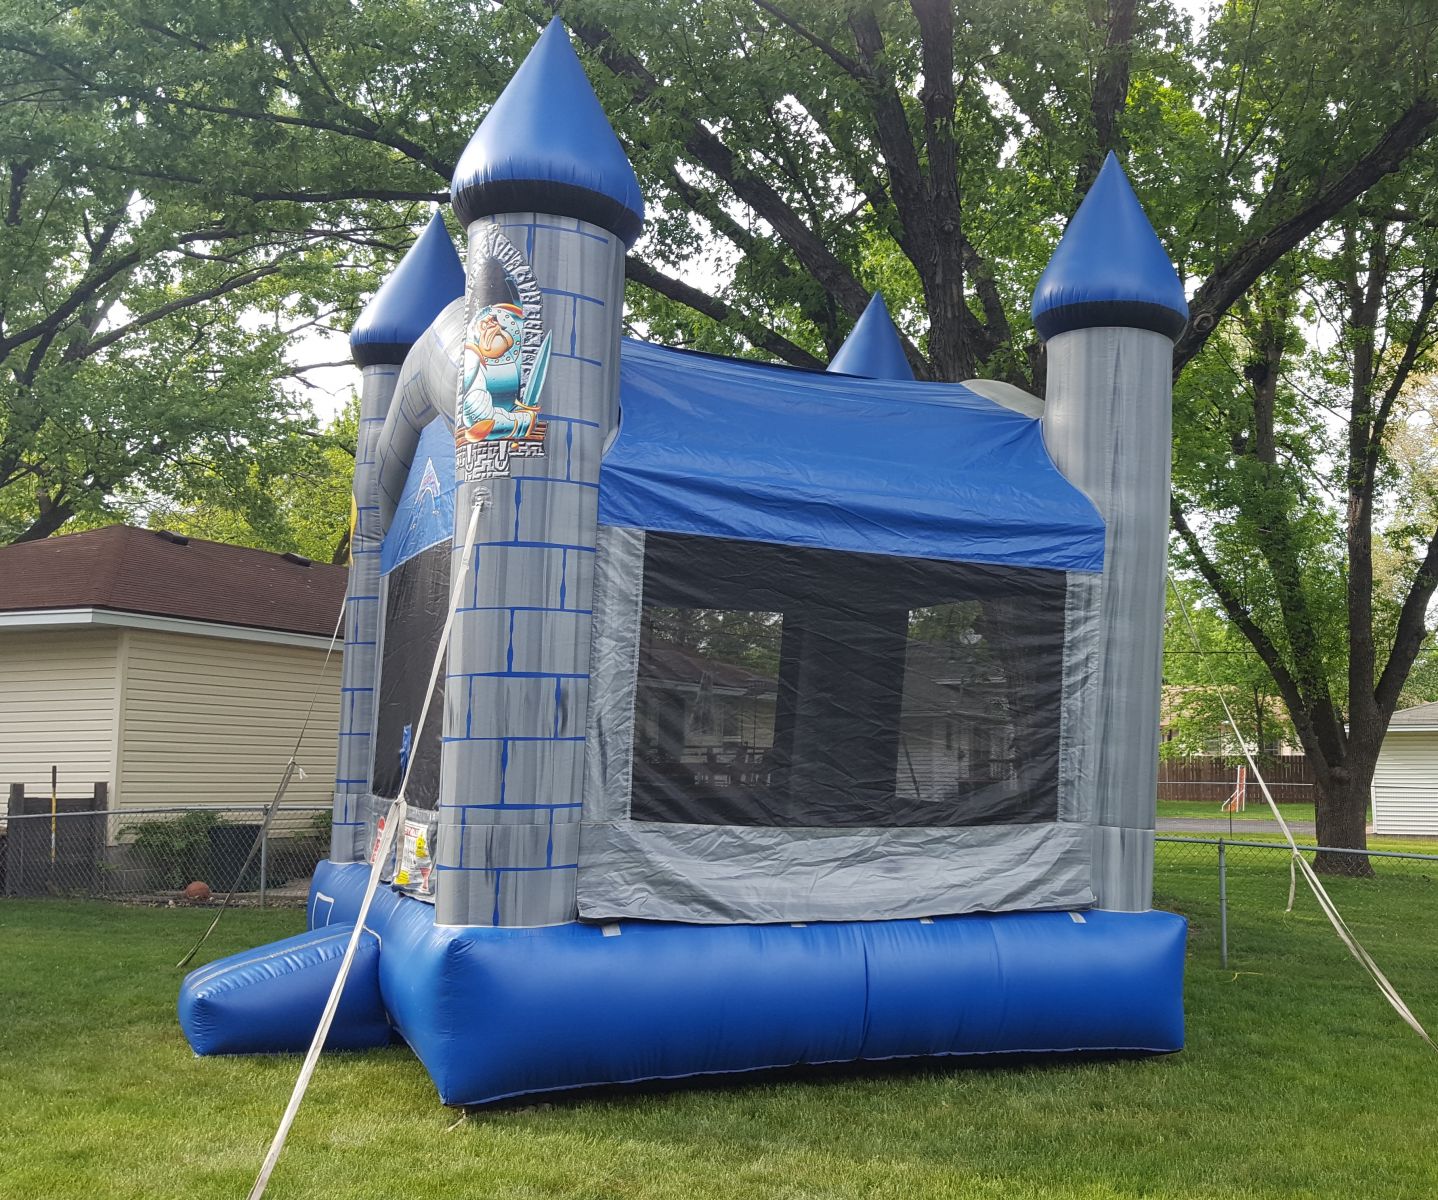 Laughs-A-Lot Bounce House side view